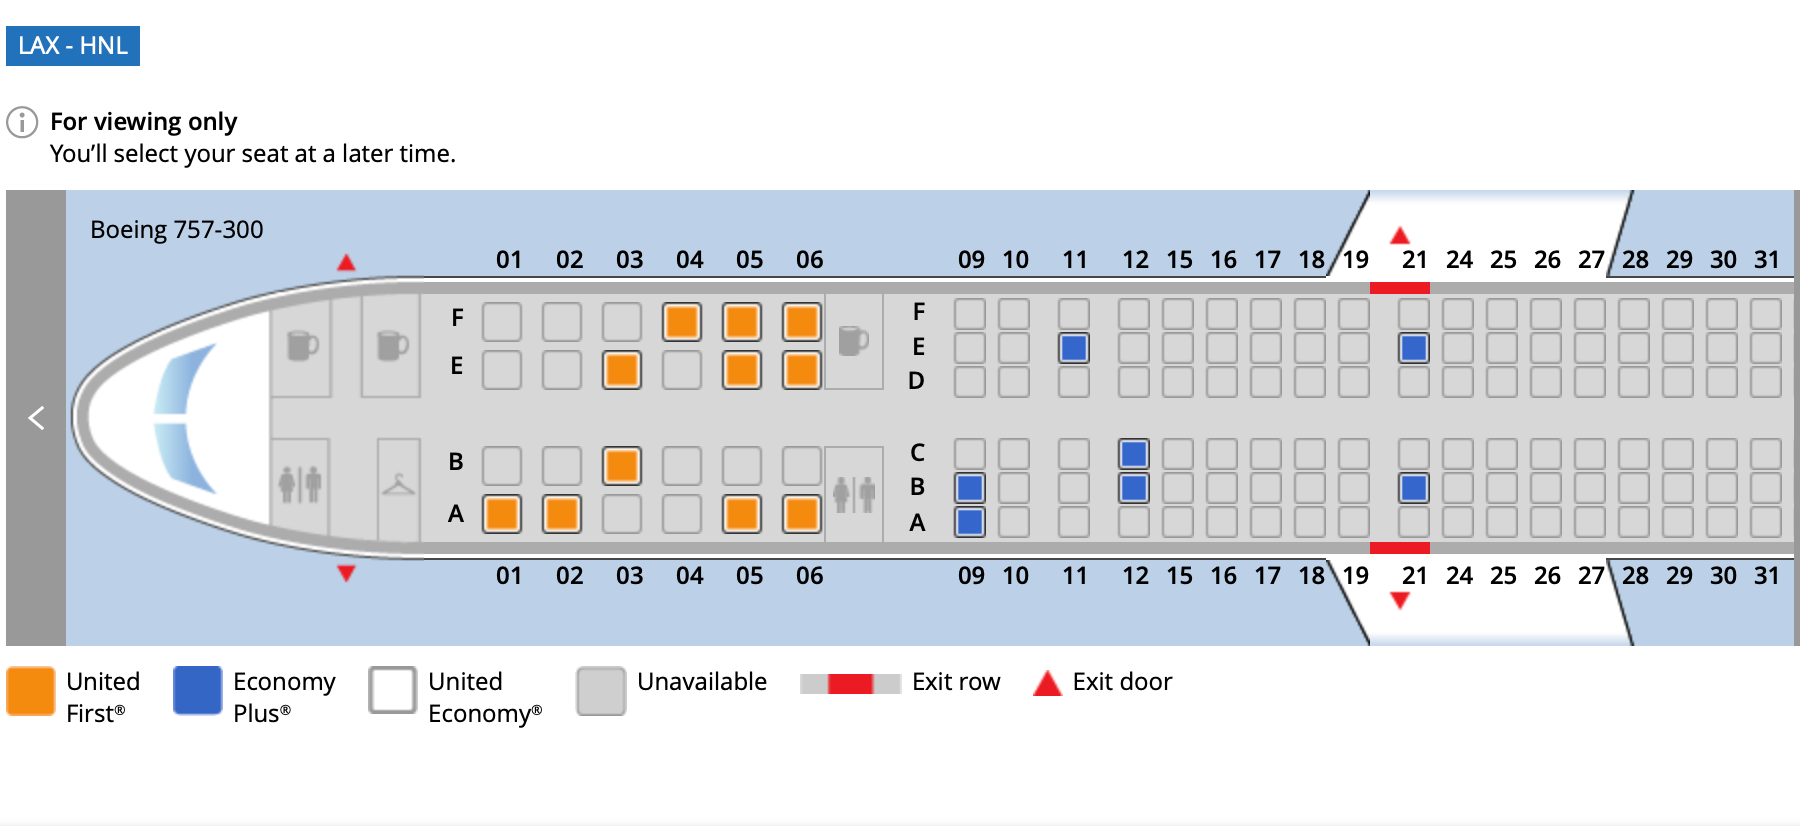 Boeing 757 Seating Chart United Airlines.